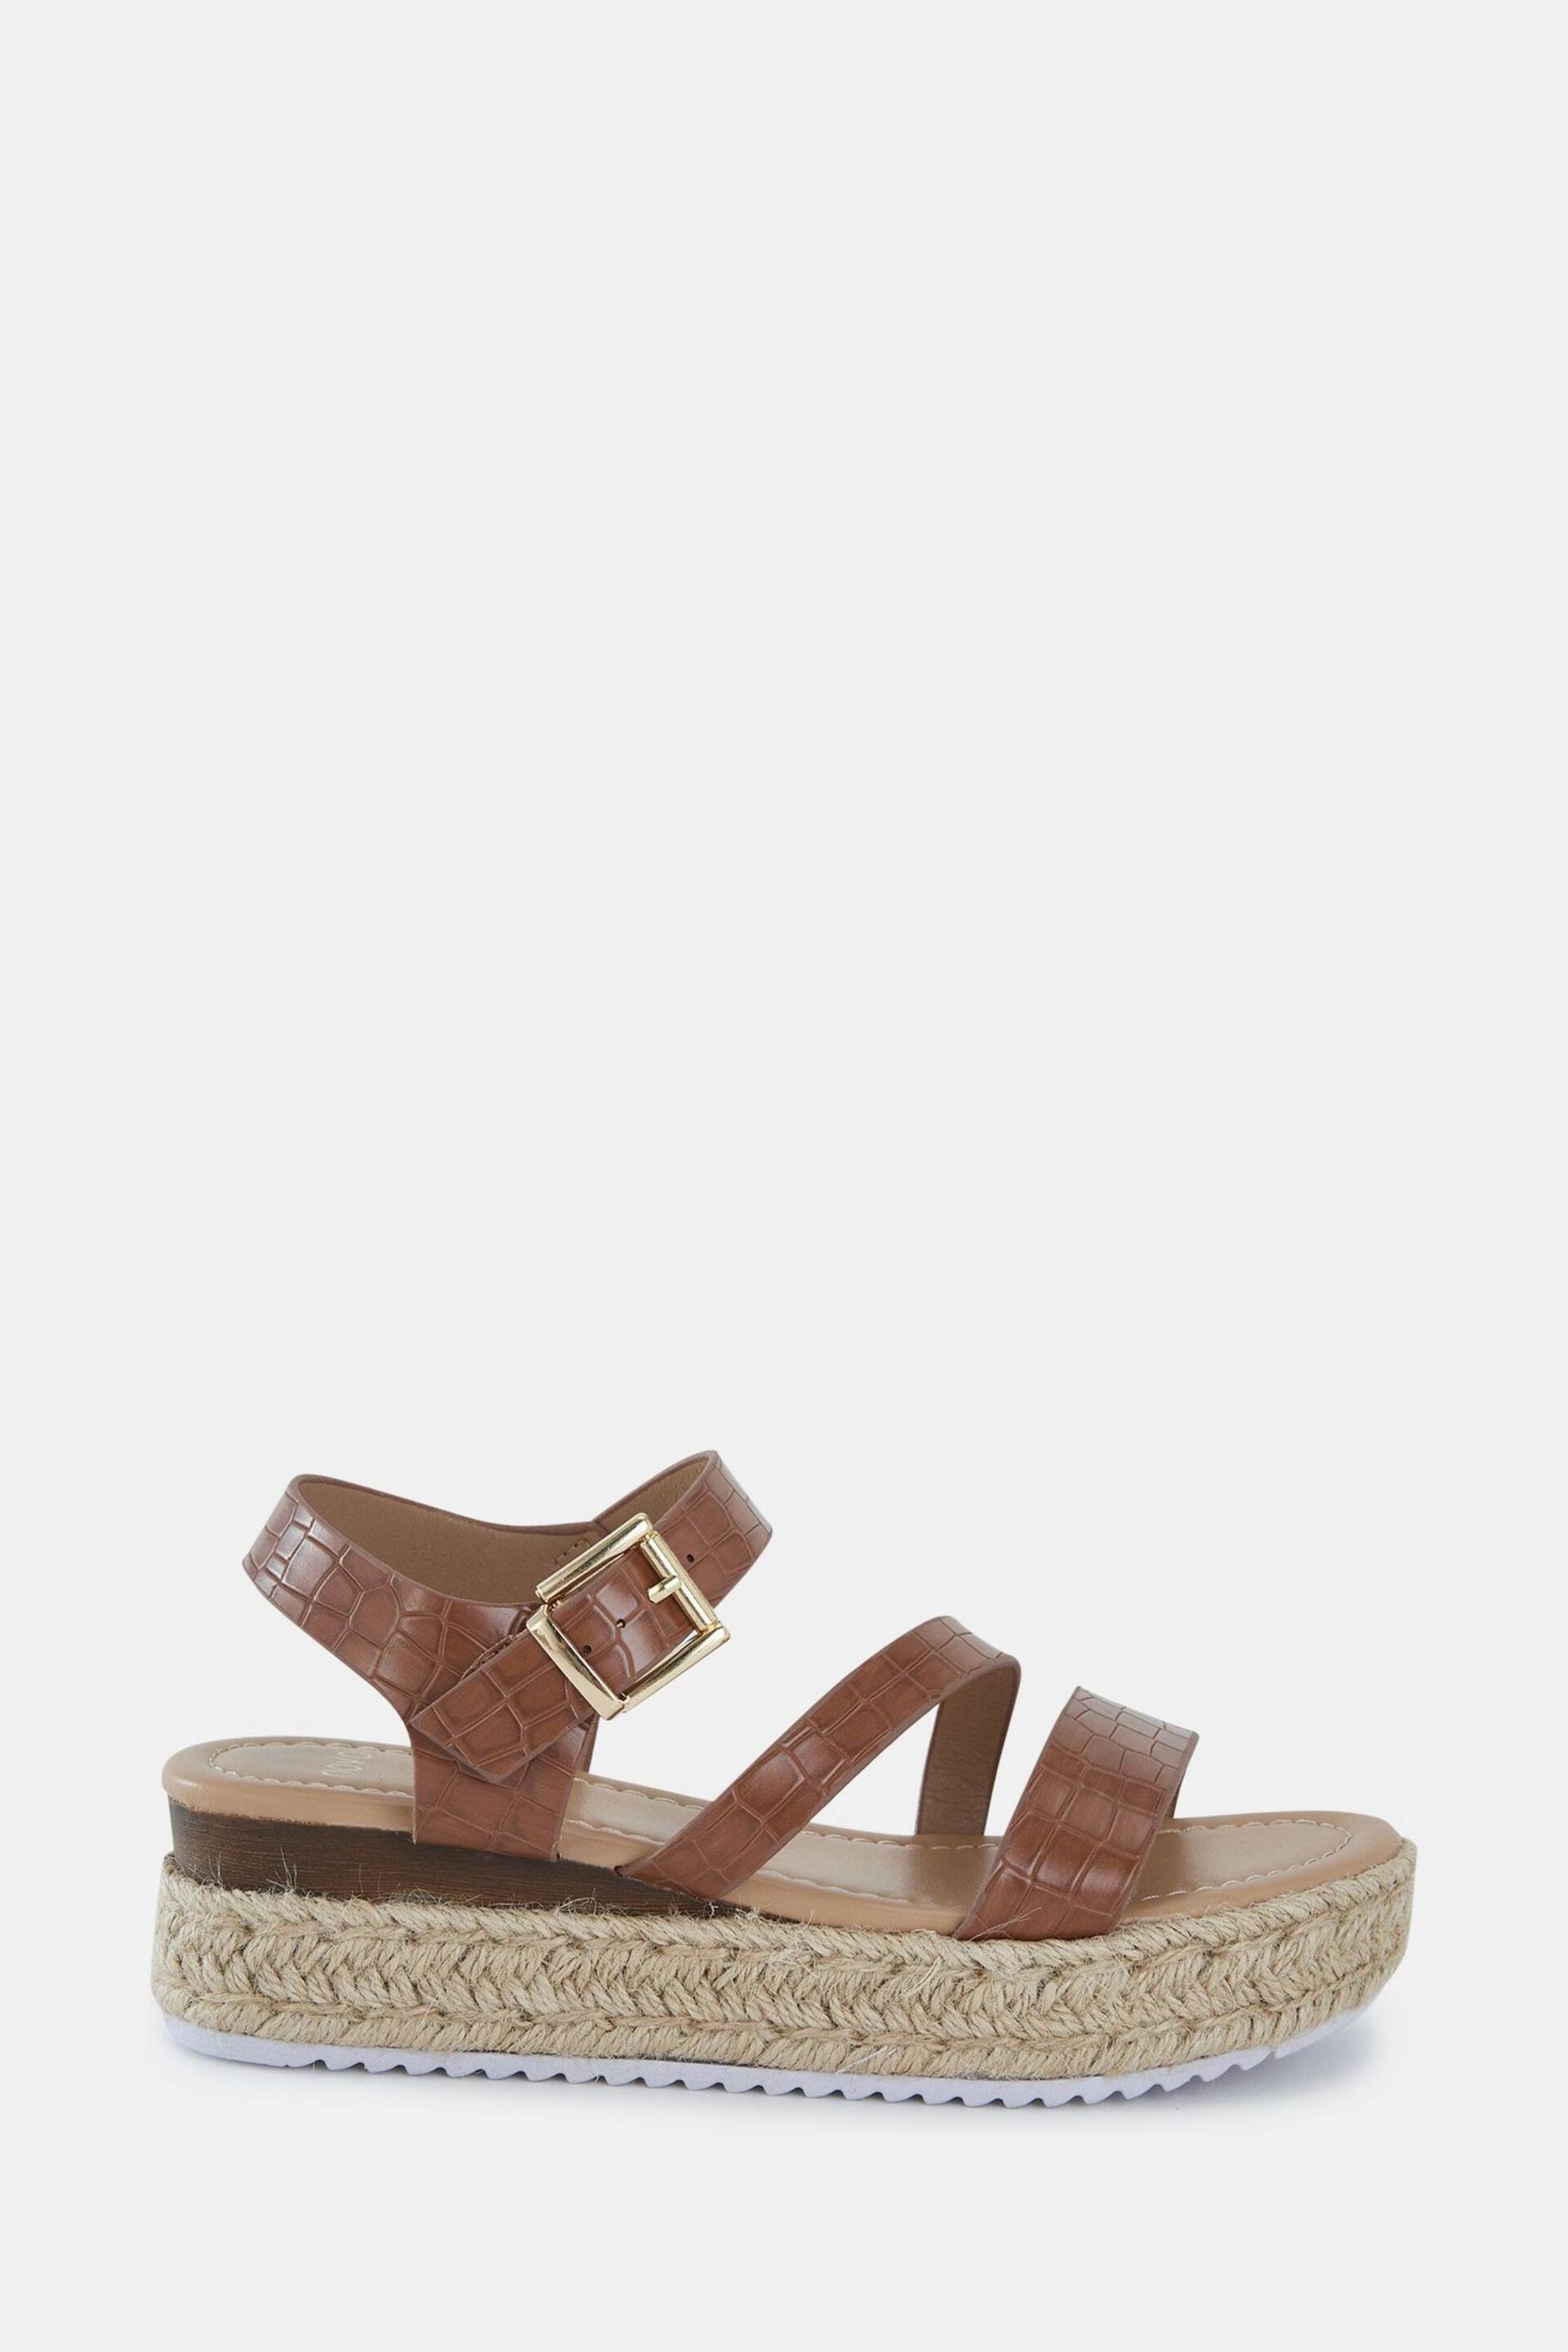 Novo Brown Regular Fit SIMBA Espadrille Strappy Sandals - Image 2 of 6